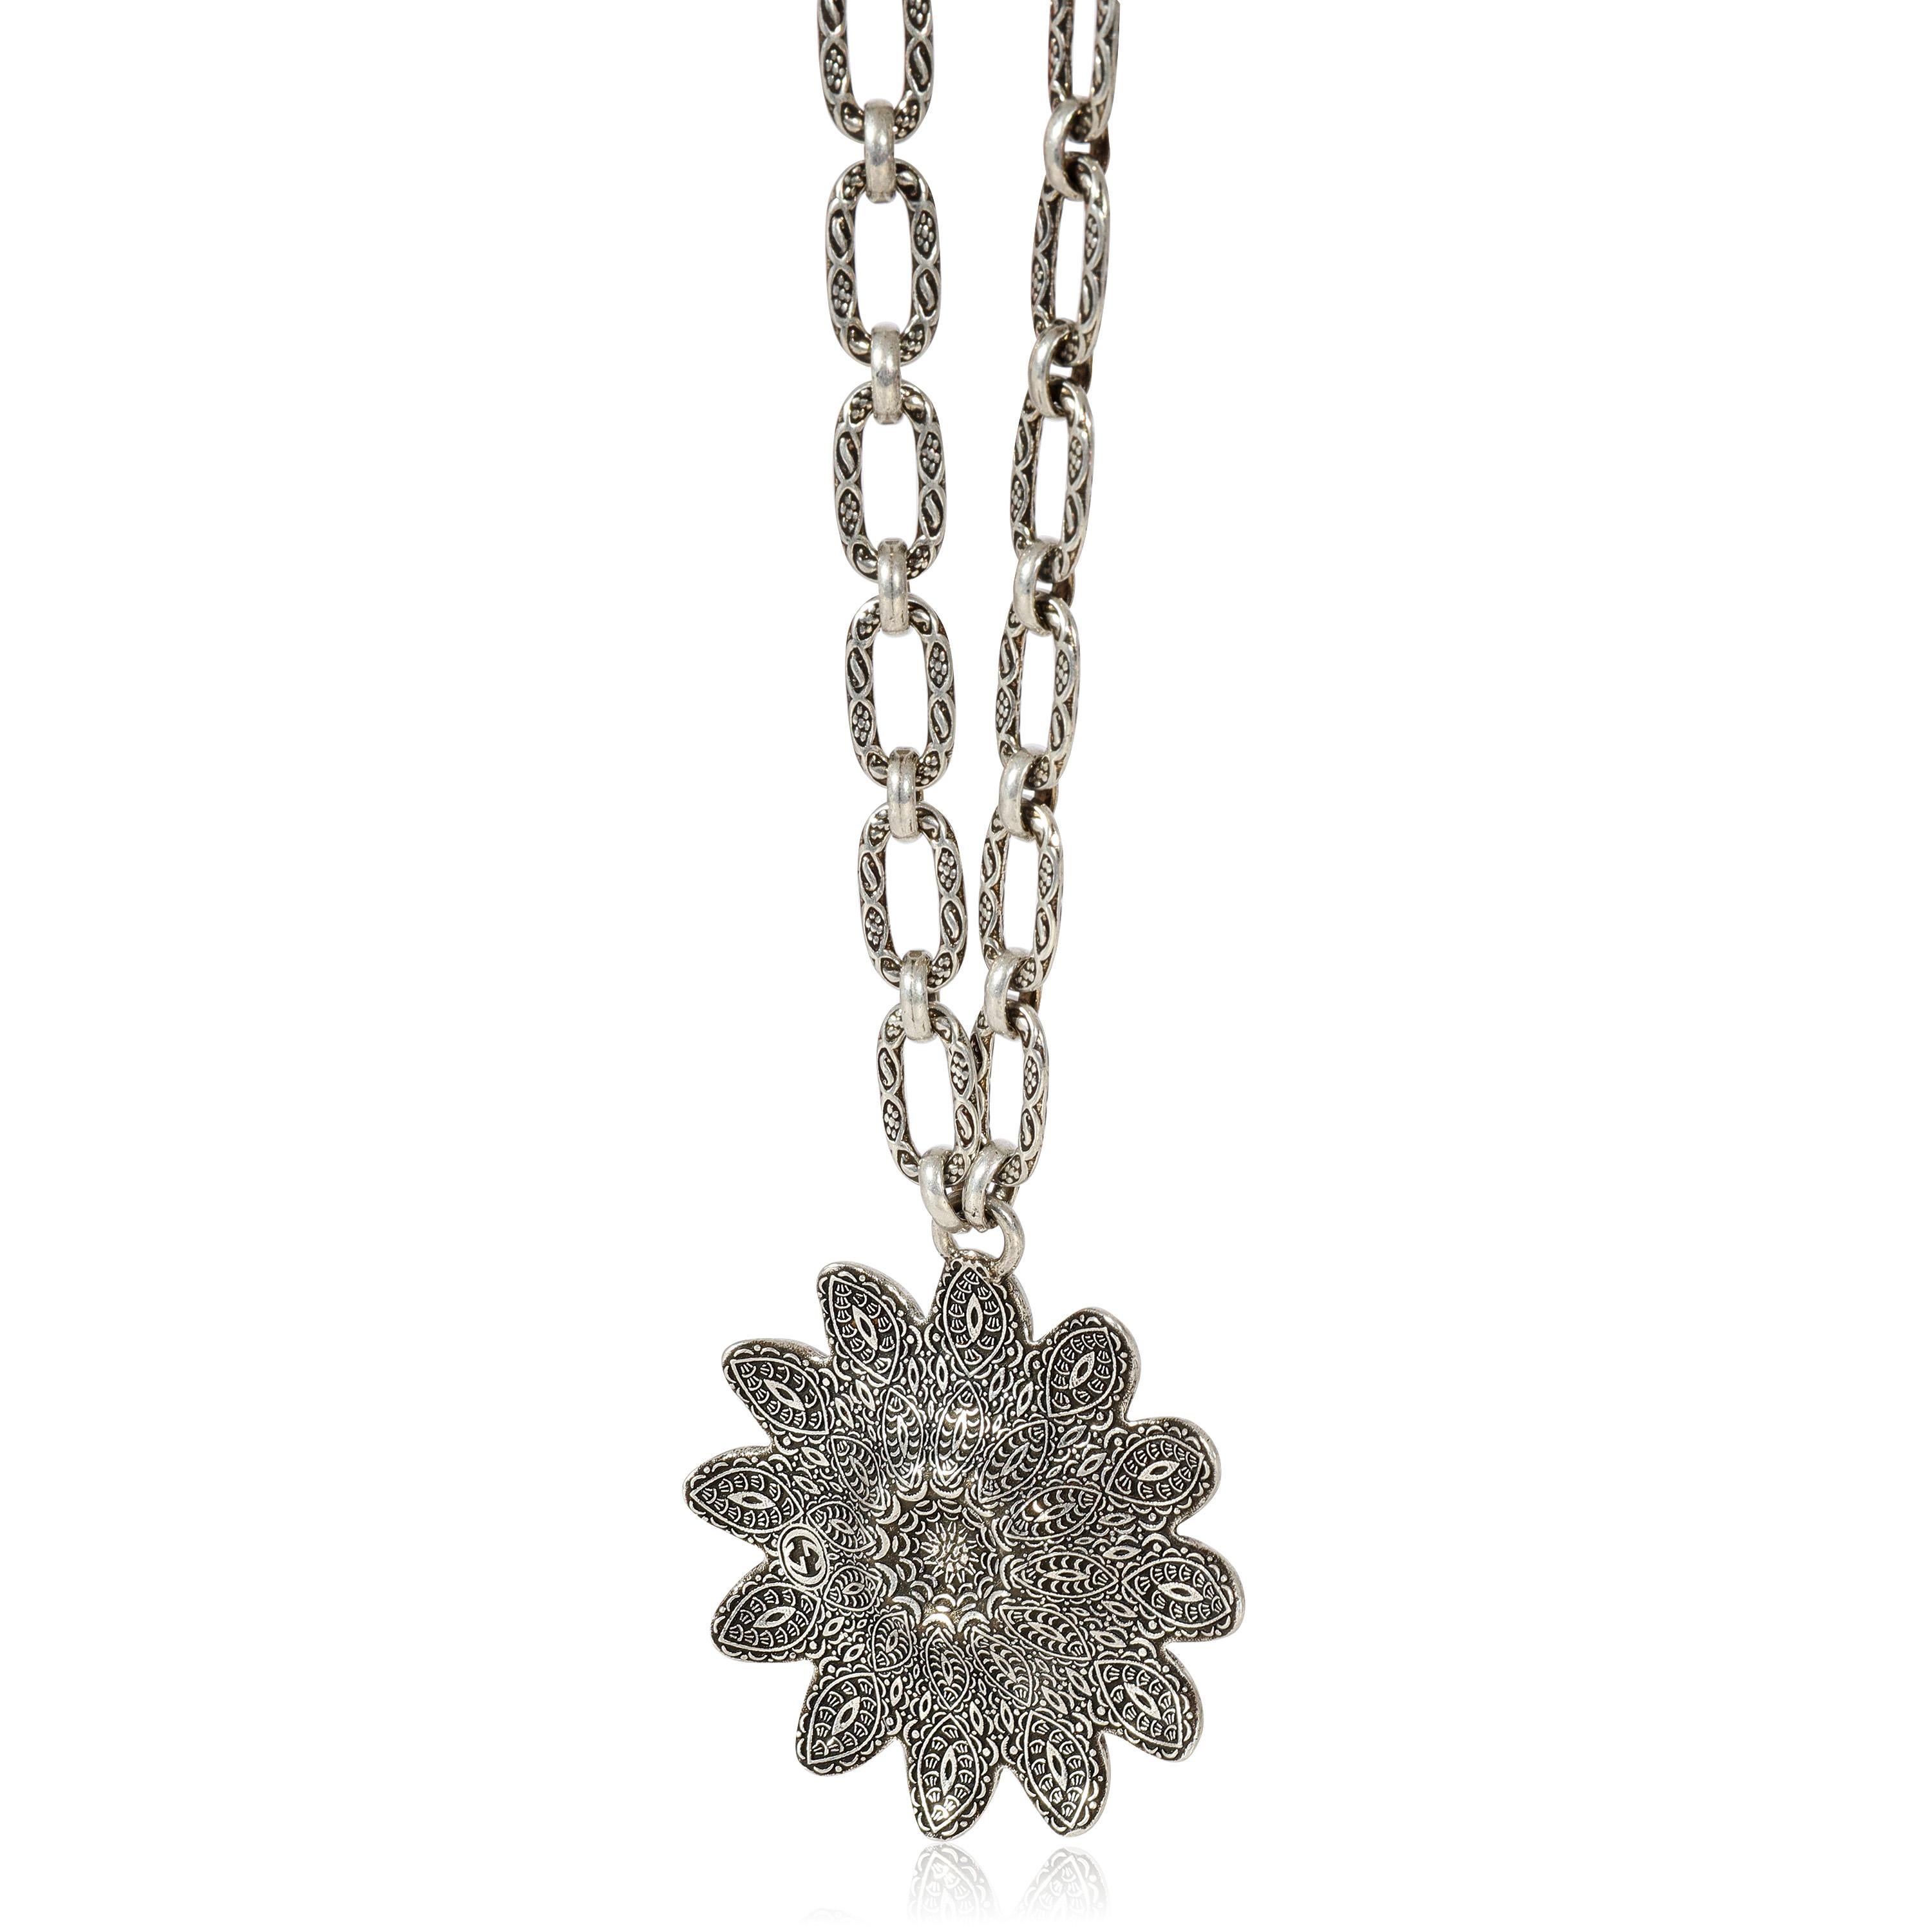 Gucci Marmont Double G Flower Necklace in Sterling Silver

PRIMARY DETAILS
SKU: 127404
Listing Title: Gucci Marmont Double G Flower Necklace in Sterling Silver
Condition Description: Retails for 1995 USD. In excellent condition. 35 inches in length.